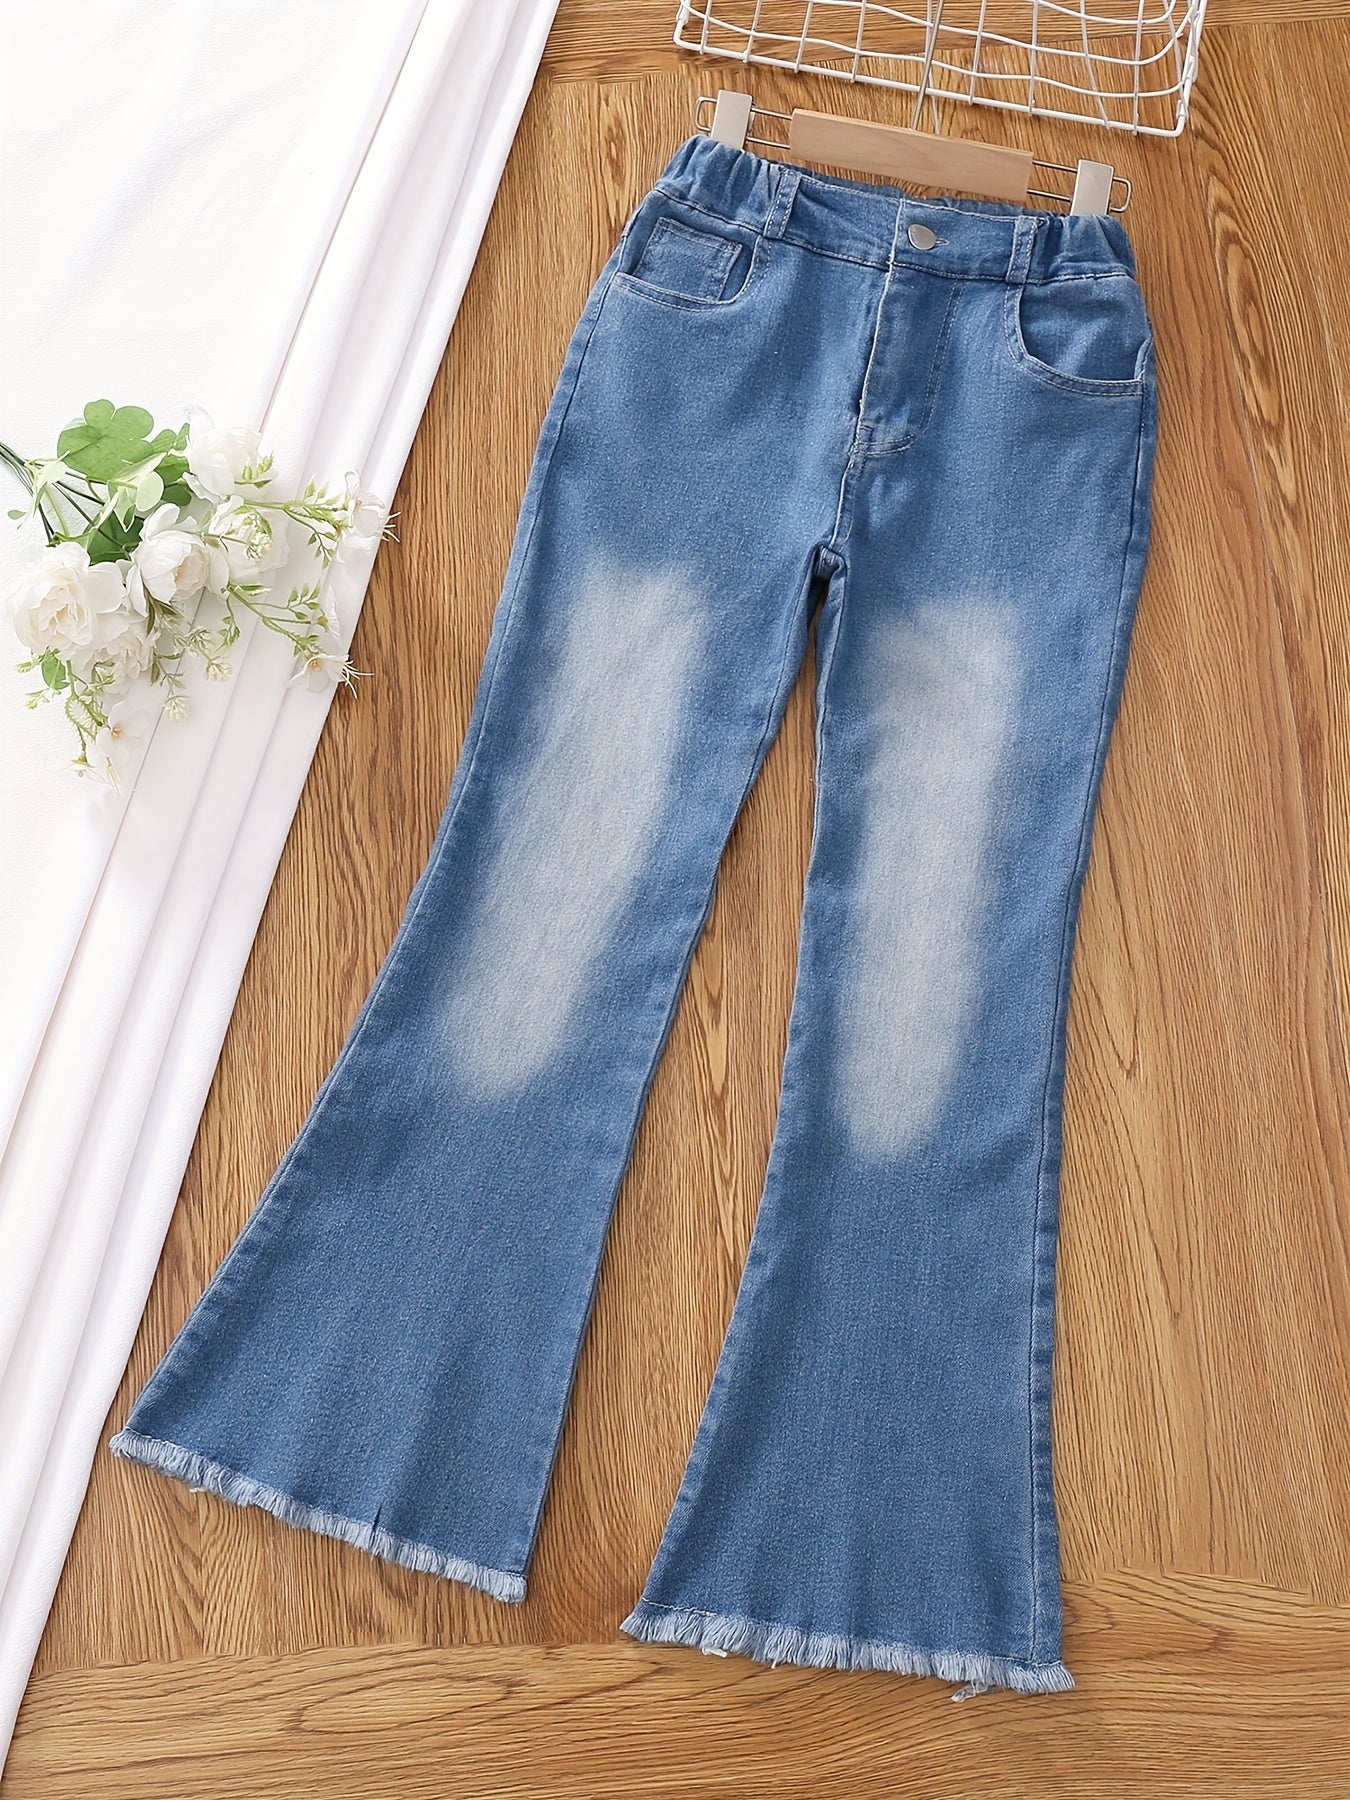 Antmvs Girls' Pull-on Flare Leg Stretch Casual Denim Jeans For Kids Teen Girls Fits For All Seasons